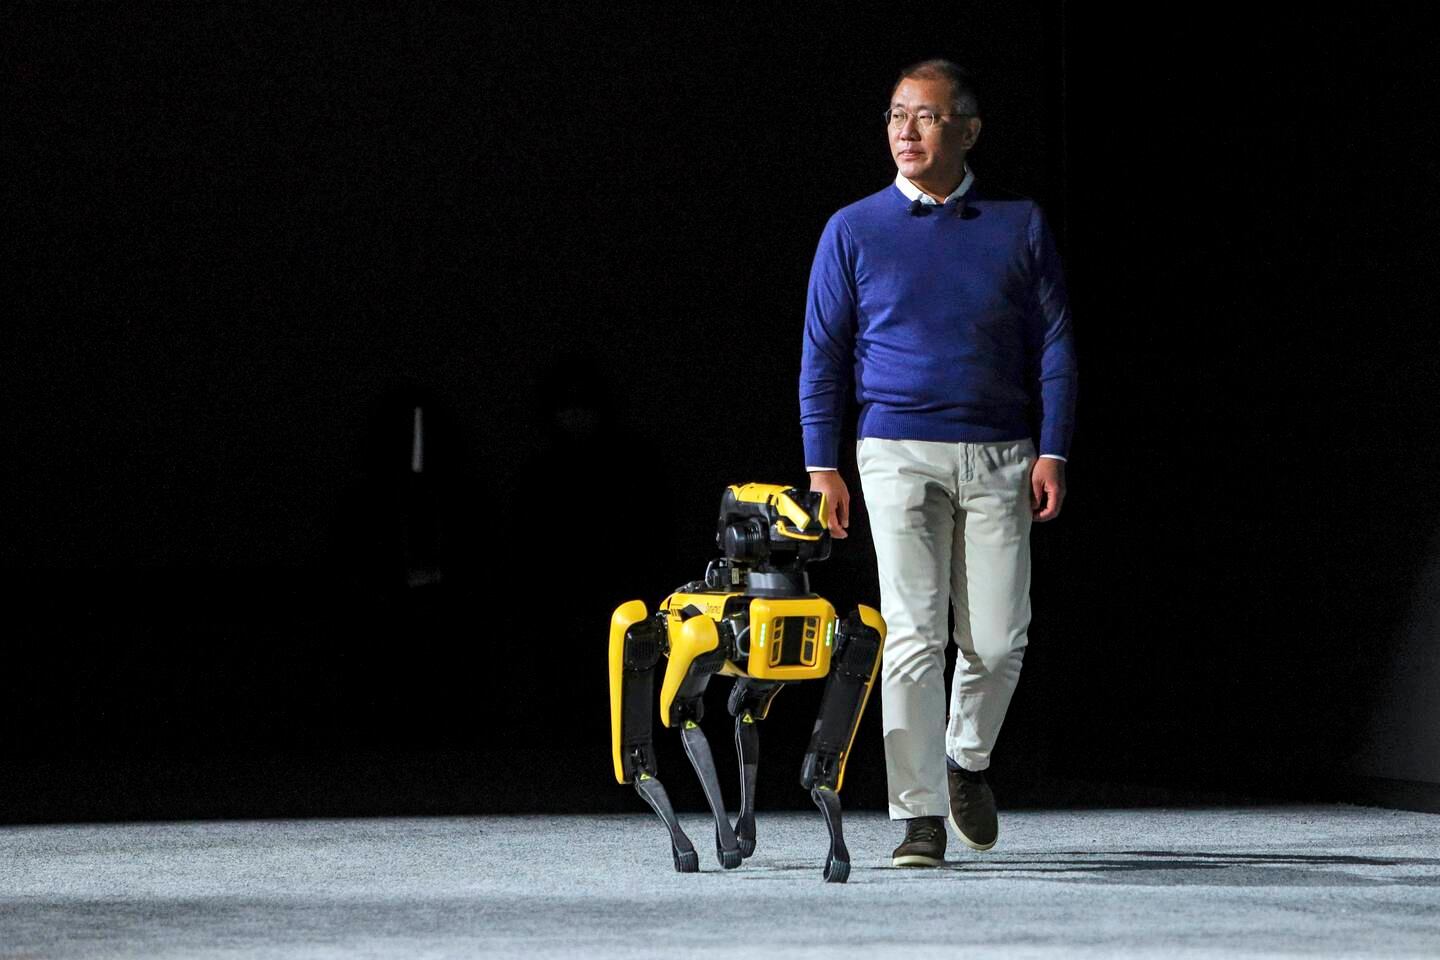 Euisun Chung, chairman of Hyundai Motor, takes the stage with the robot Spot from Boston Dynamics at the CES tech show in Las Vegas. AP